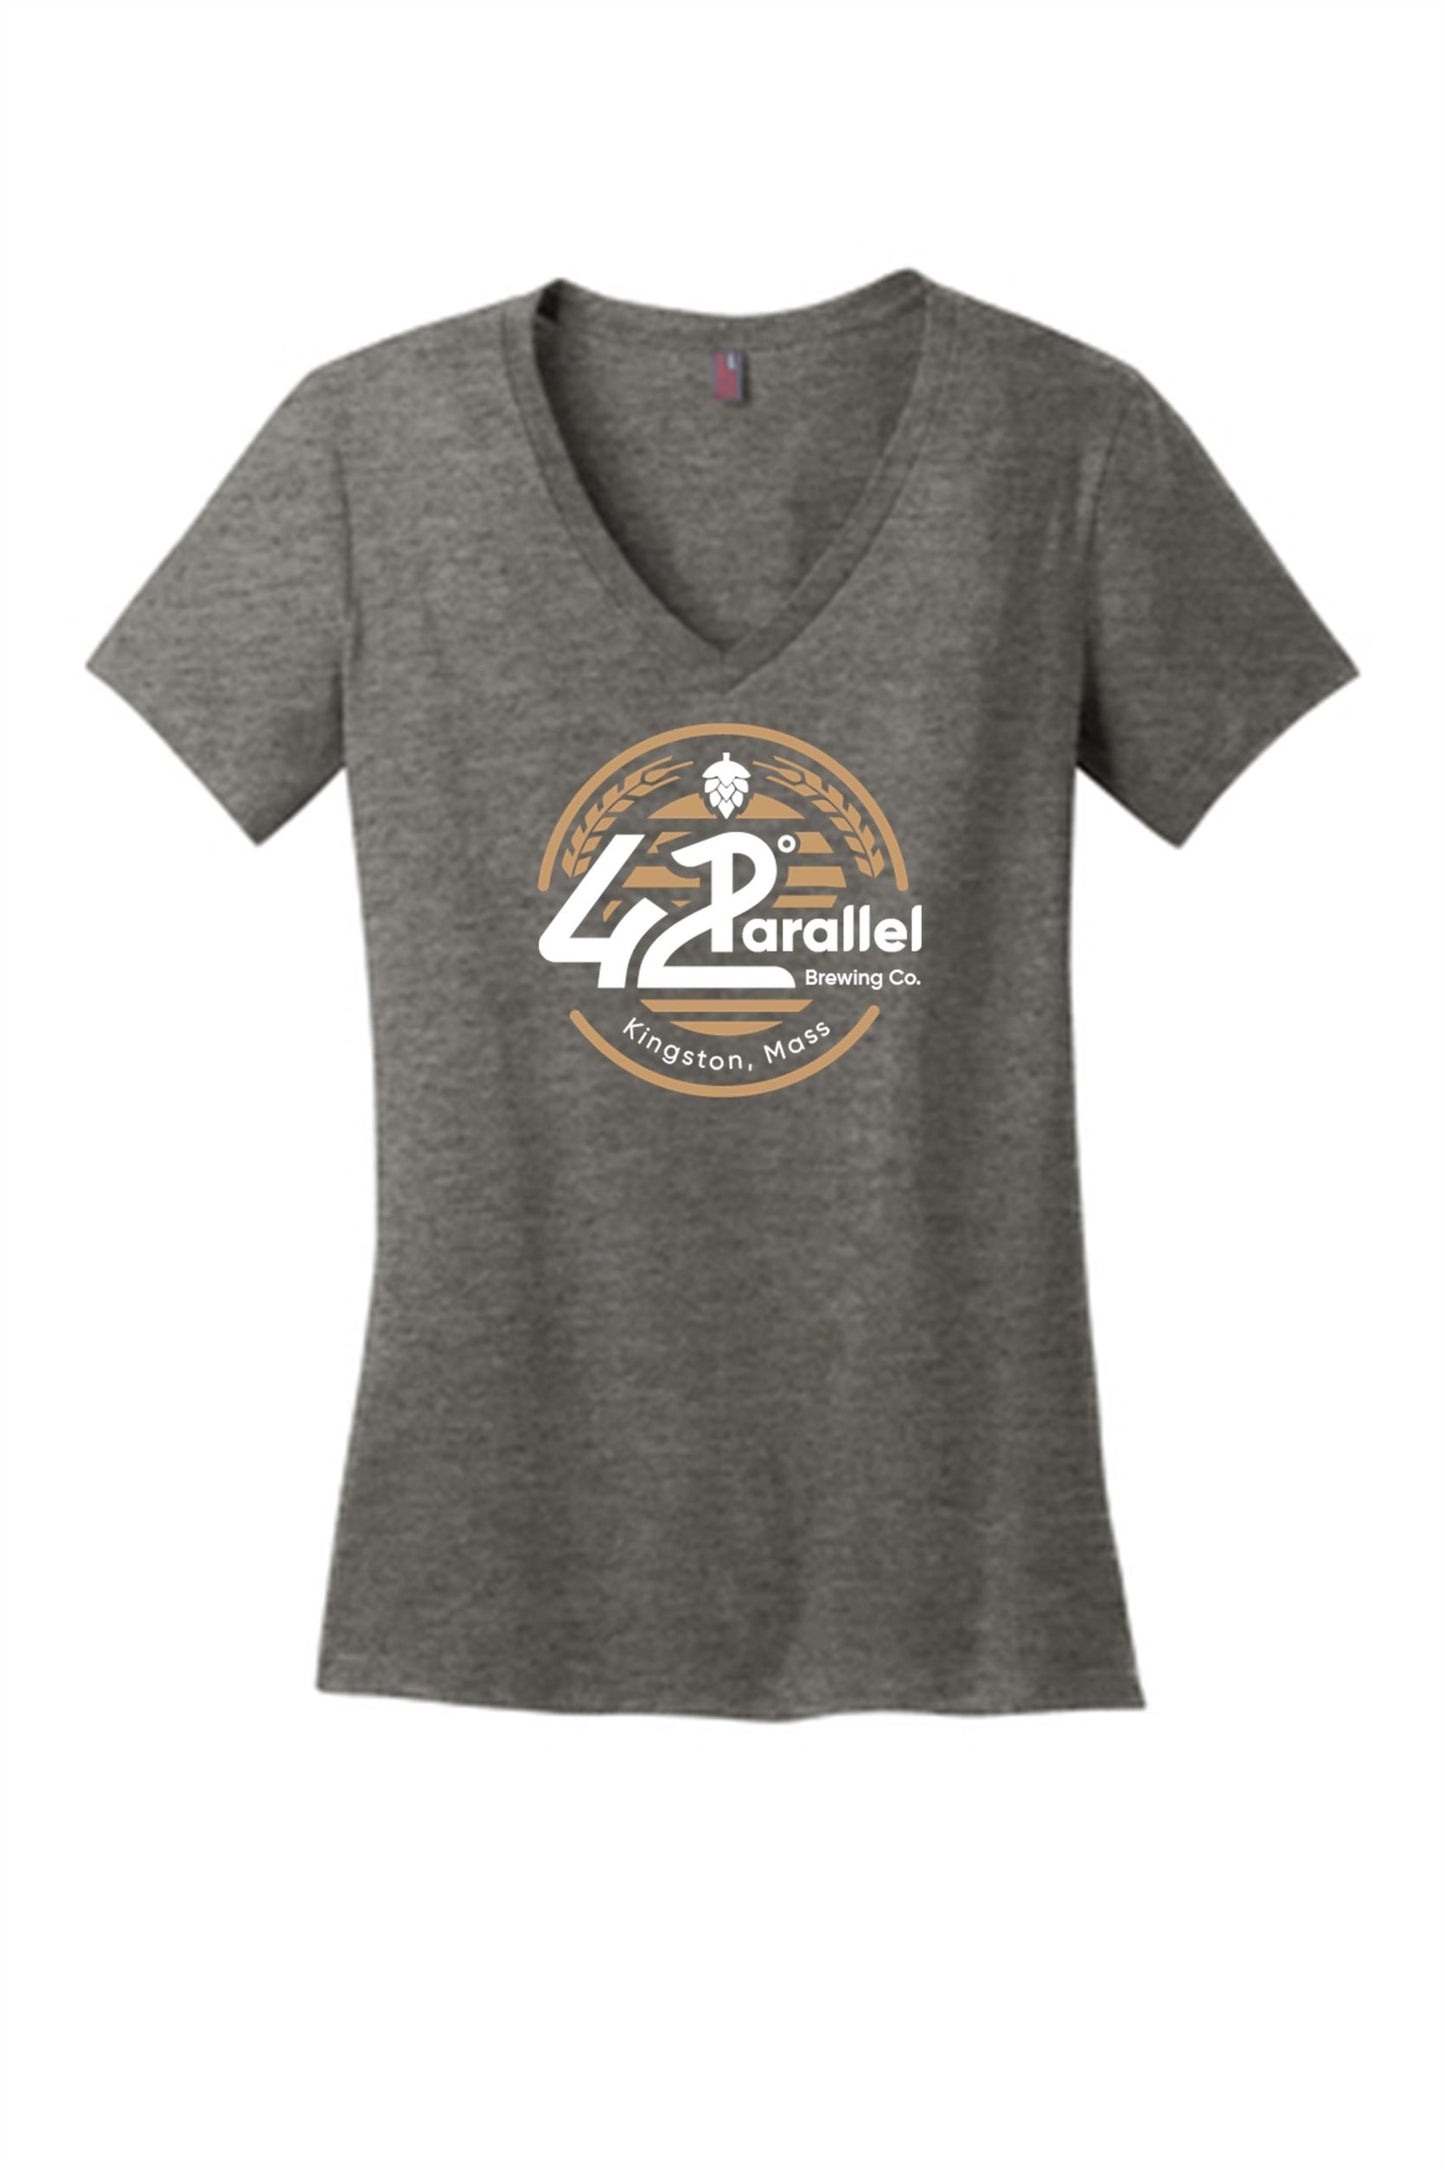 42 Parallel Women's Perfect Weight V-Neck